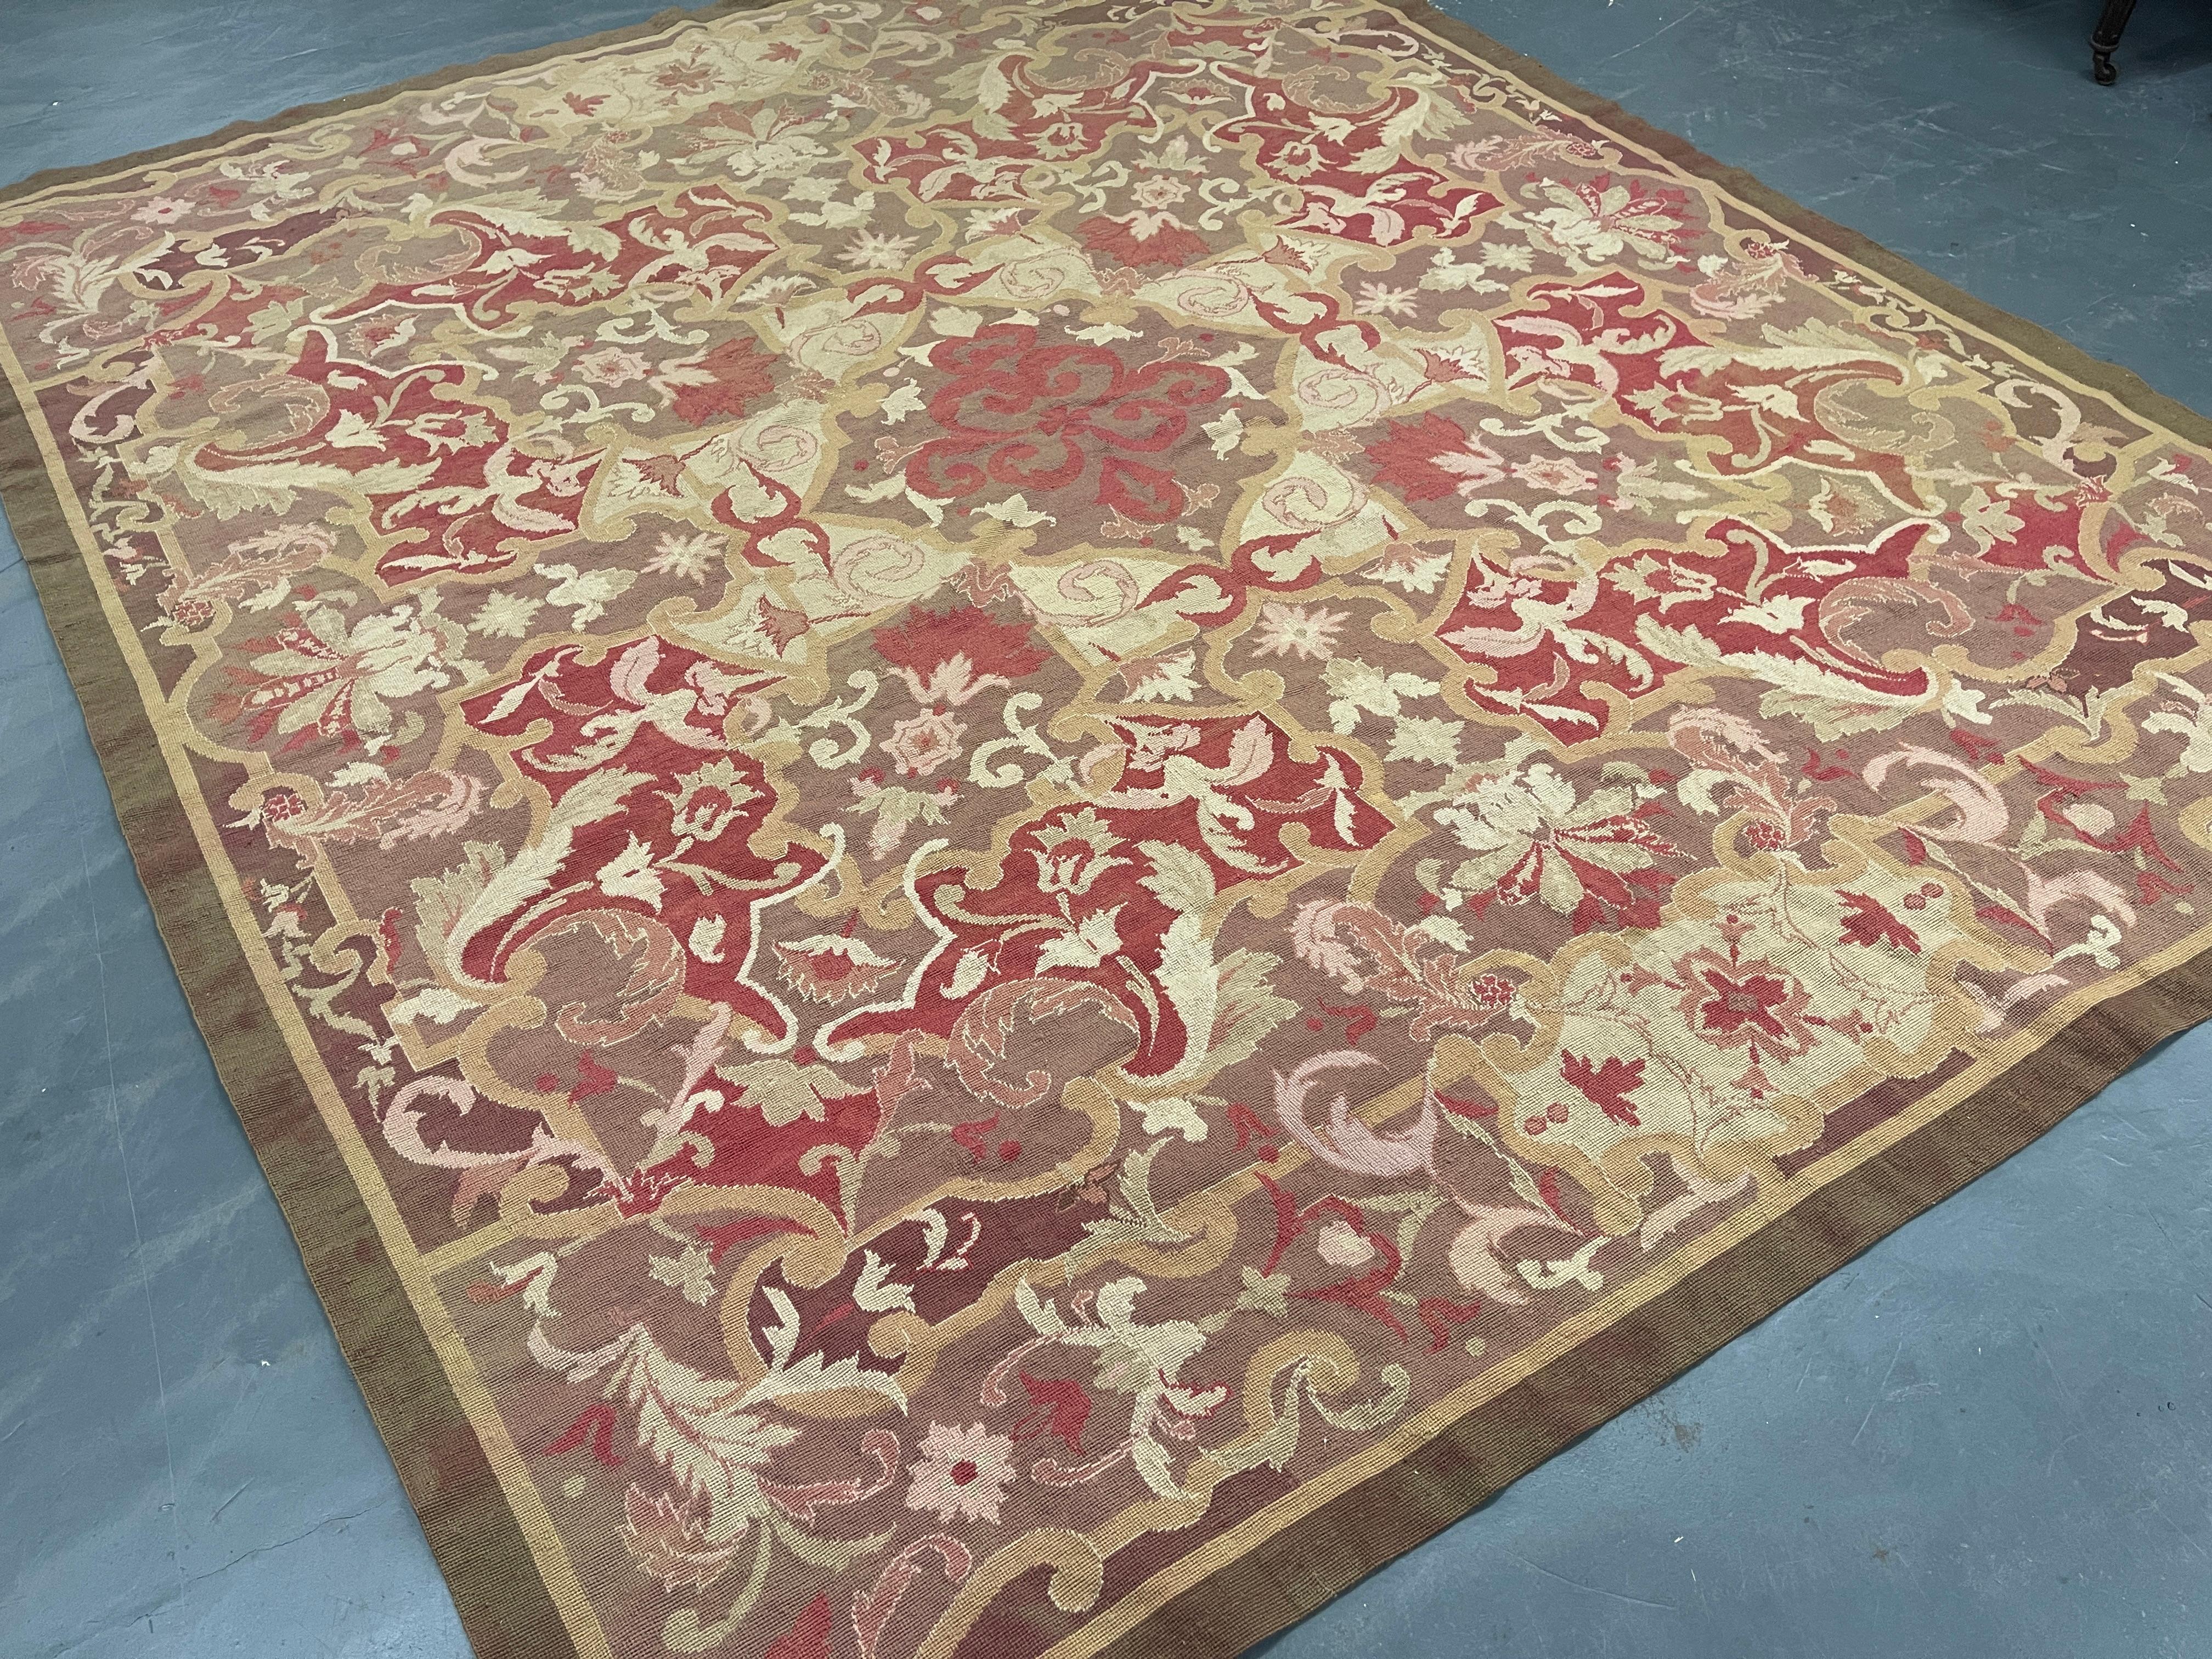 This fantastic square area rug has been handwoven with a beautiful symmetrical floral design woven on a pink background with brown, green, and ivory accents. This elegant piece's colour and design make it the perfect accent rug.
This style of rugs